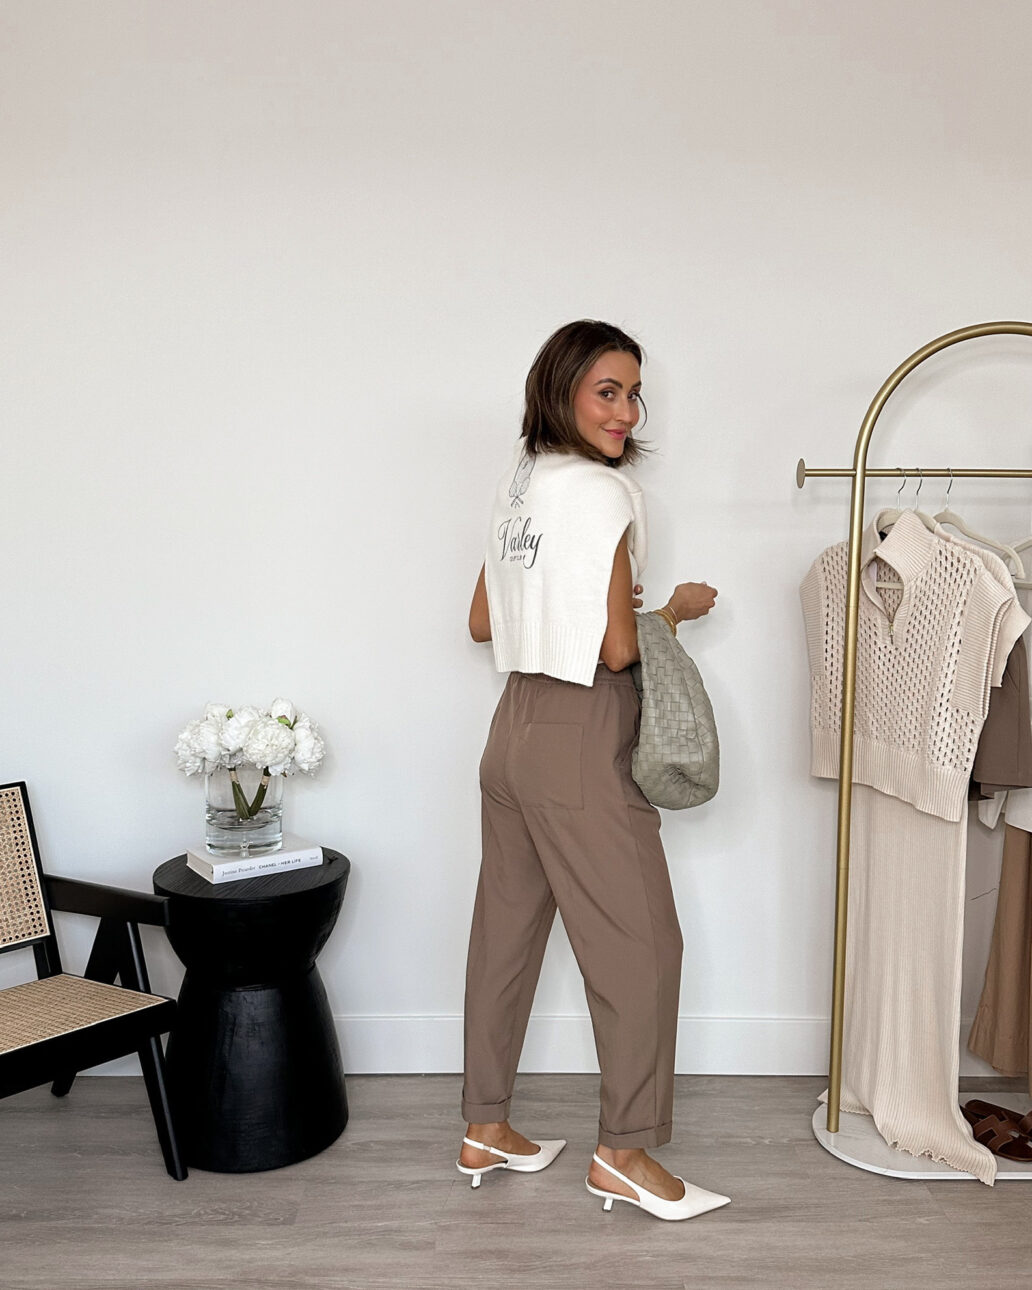 varley taper pants with heels, a white t-shirt, and a sweater